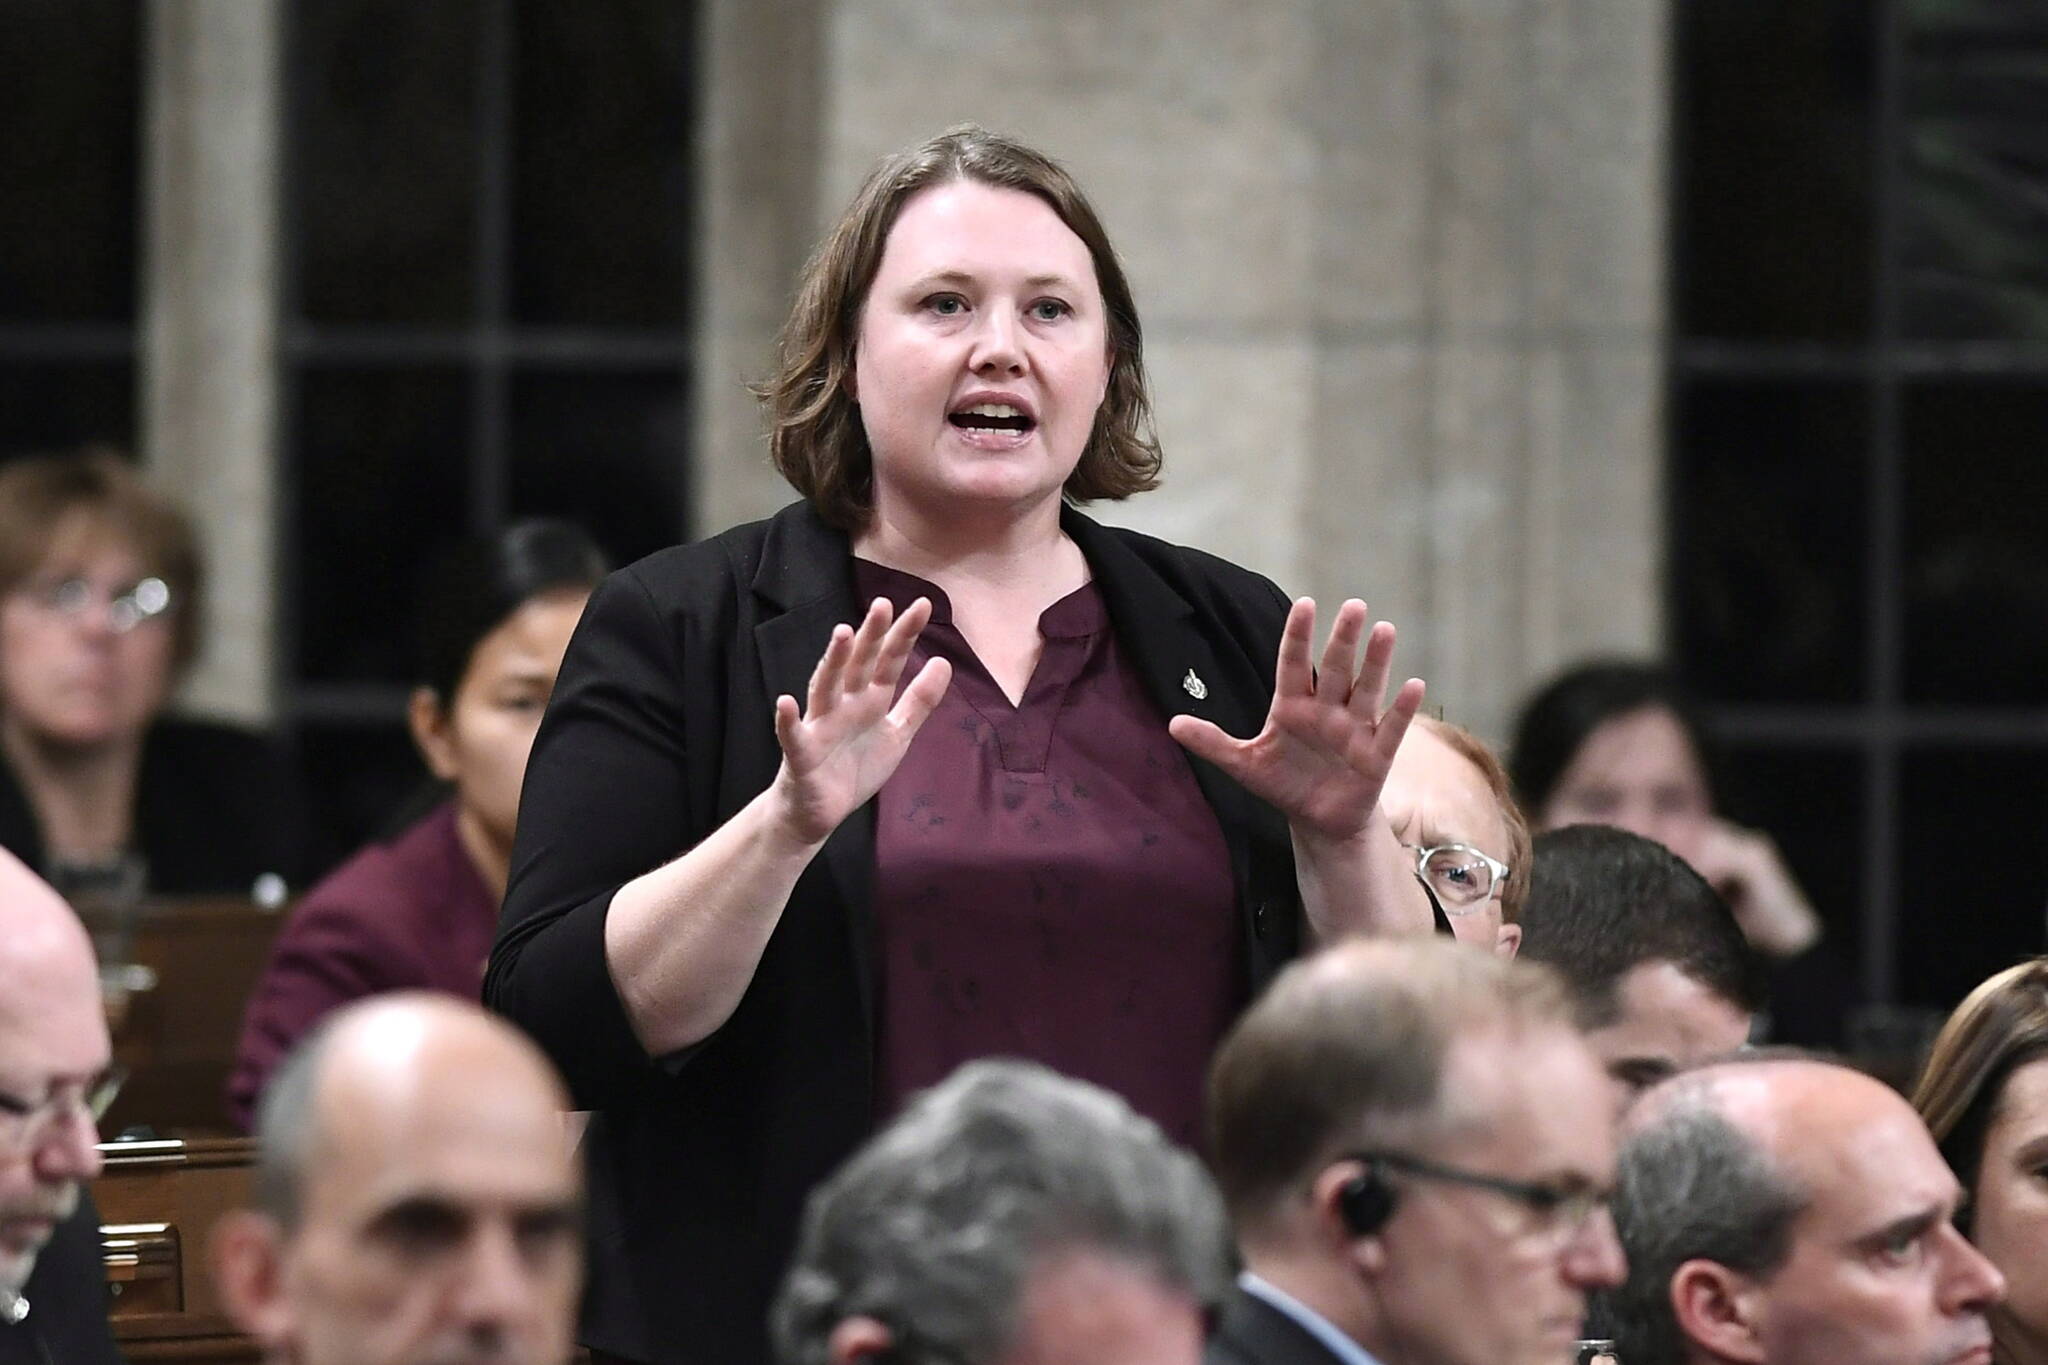 MPs from different parties say they have no clue how to spot foreign interference, as Canada’s spy agency warns all elected officials are targets for states such as China. MP Rachel Blaney rises during Question Period in the House of Commons on Parliament Hill in Ottawa on Monday, Nov. 19, 2018. THE CANADIAN PRESS/Justin Tang